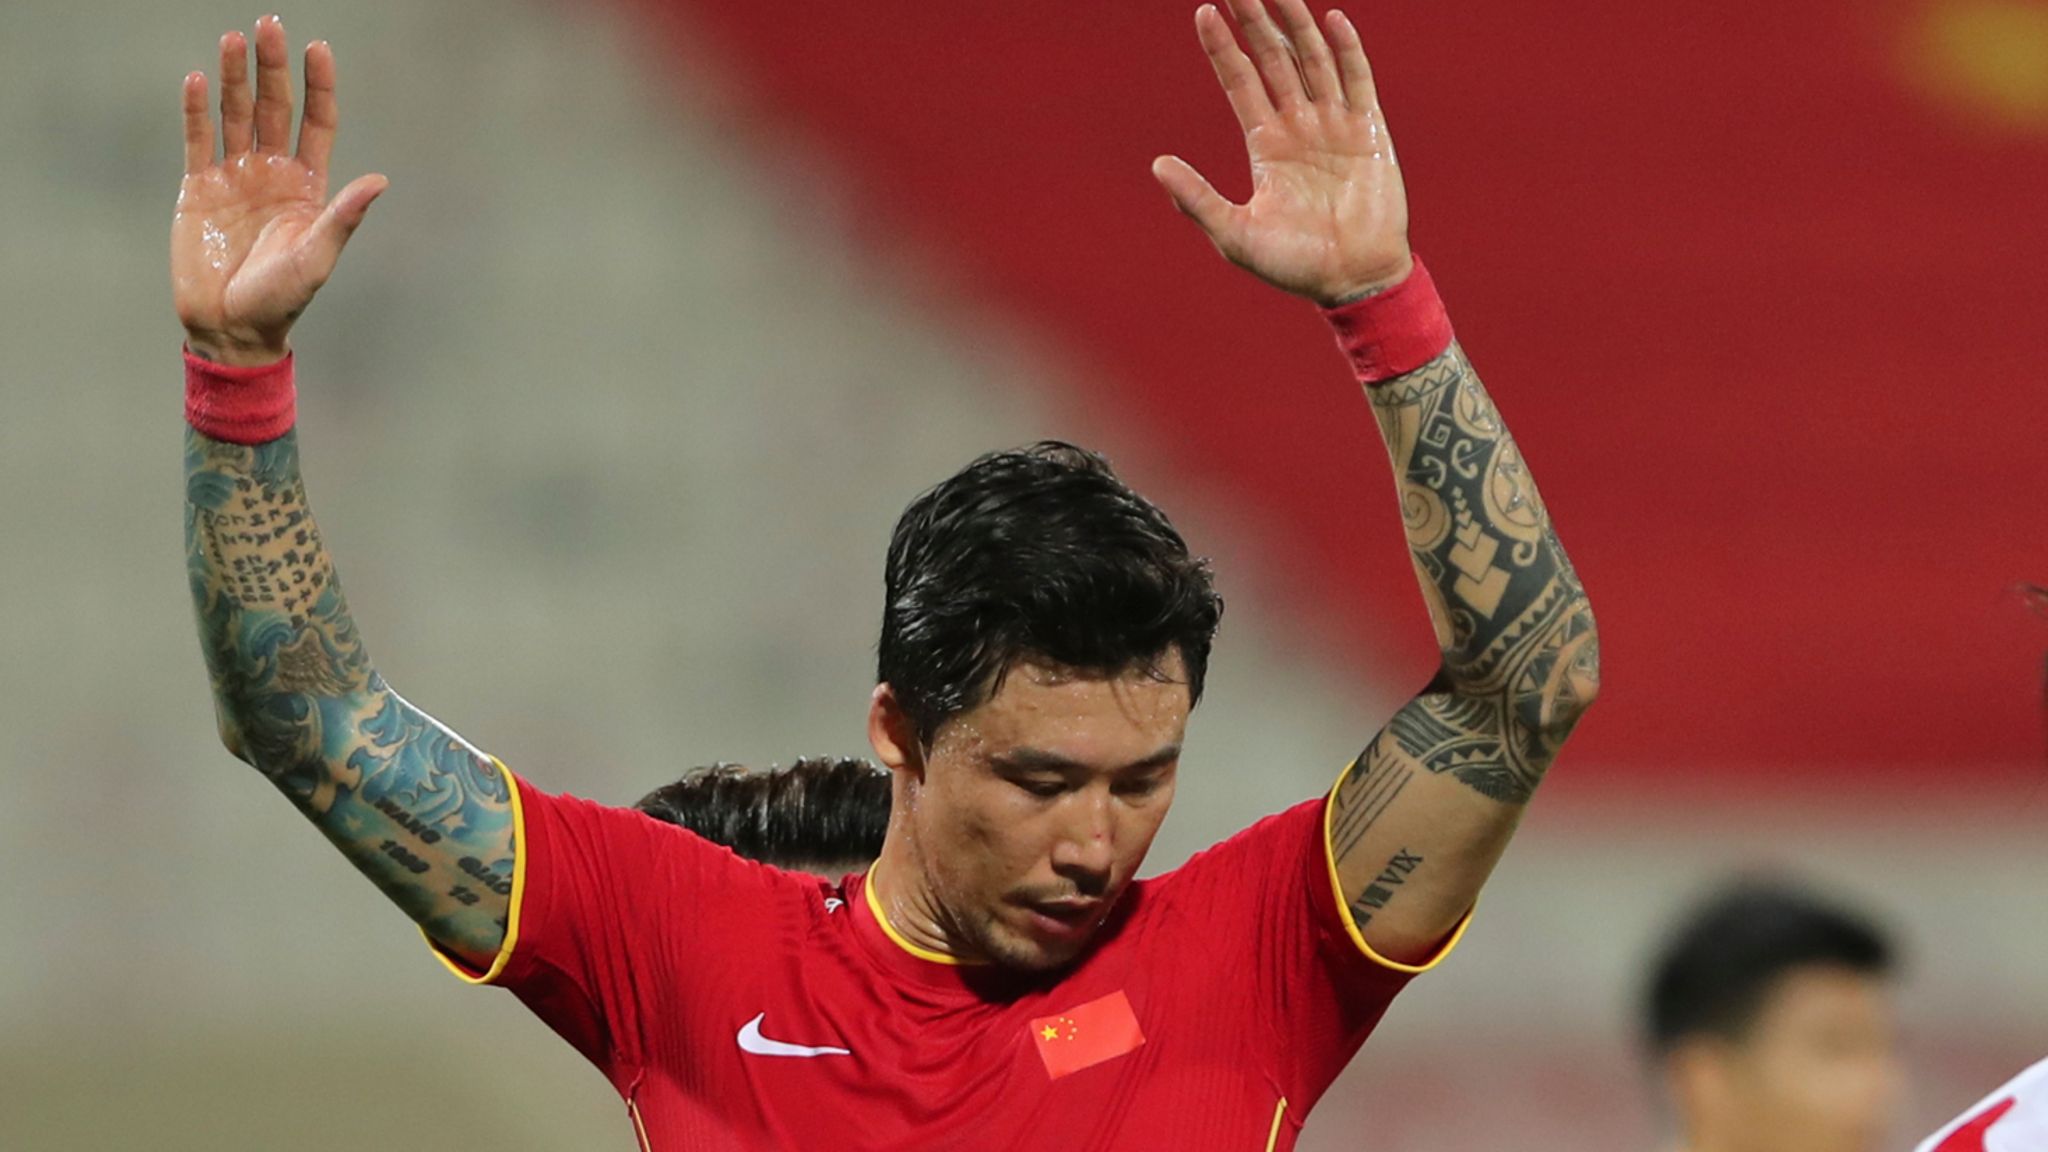 Chinese authorities ban national-team footballers from showing tattoos to set 'good example for society'